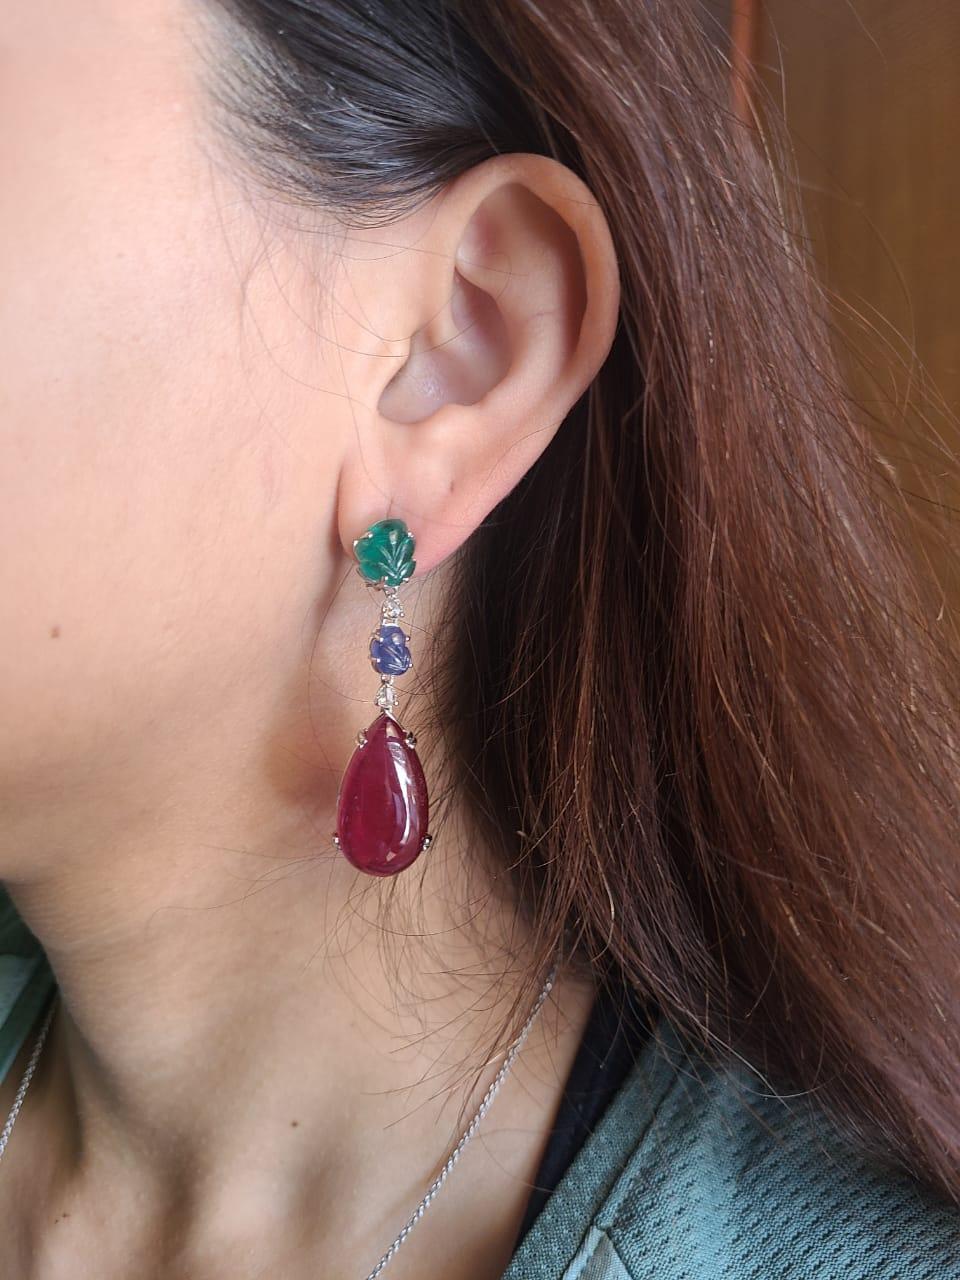 A very gorgeous and one of a kind, Rubellite, Emerald & Blue Sapphire Chandelier / Drop Earrings set in 18K Gold & Diamonds. The weight of the Rubellite pair is 44.04 carats. The weight of the carved Emerald is 4.43 carats. The Emeralds are of